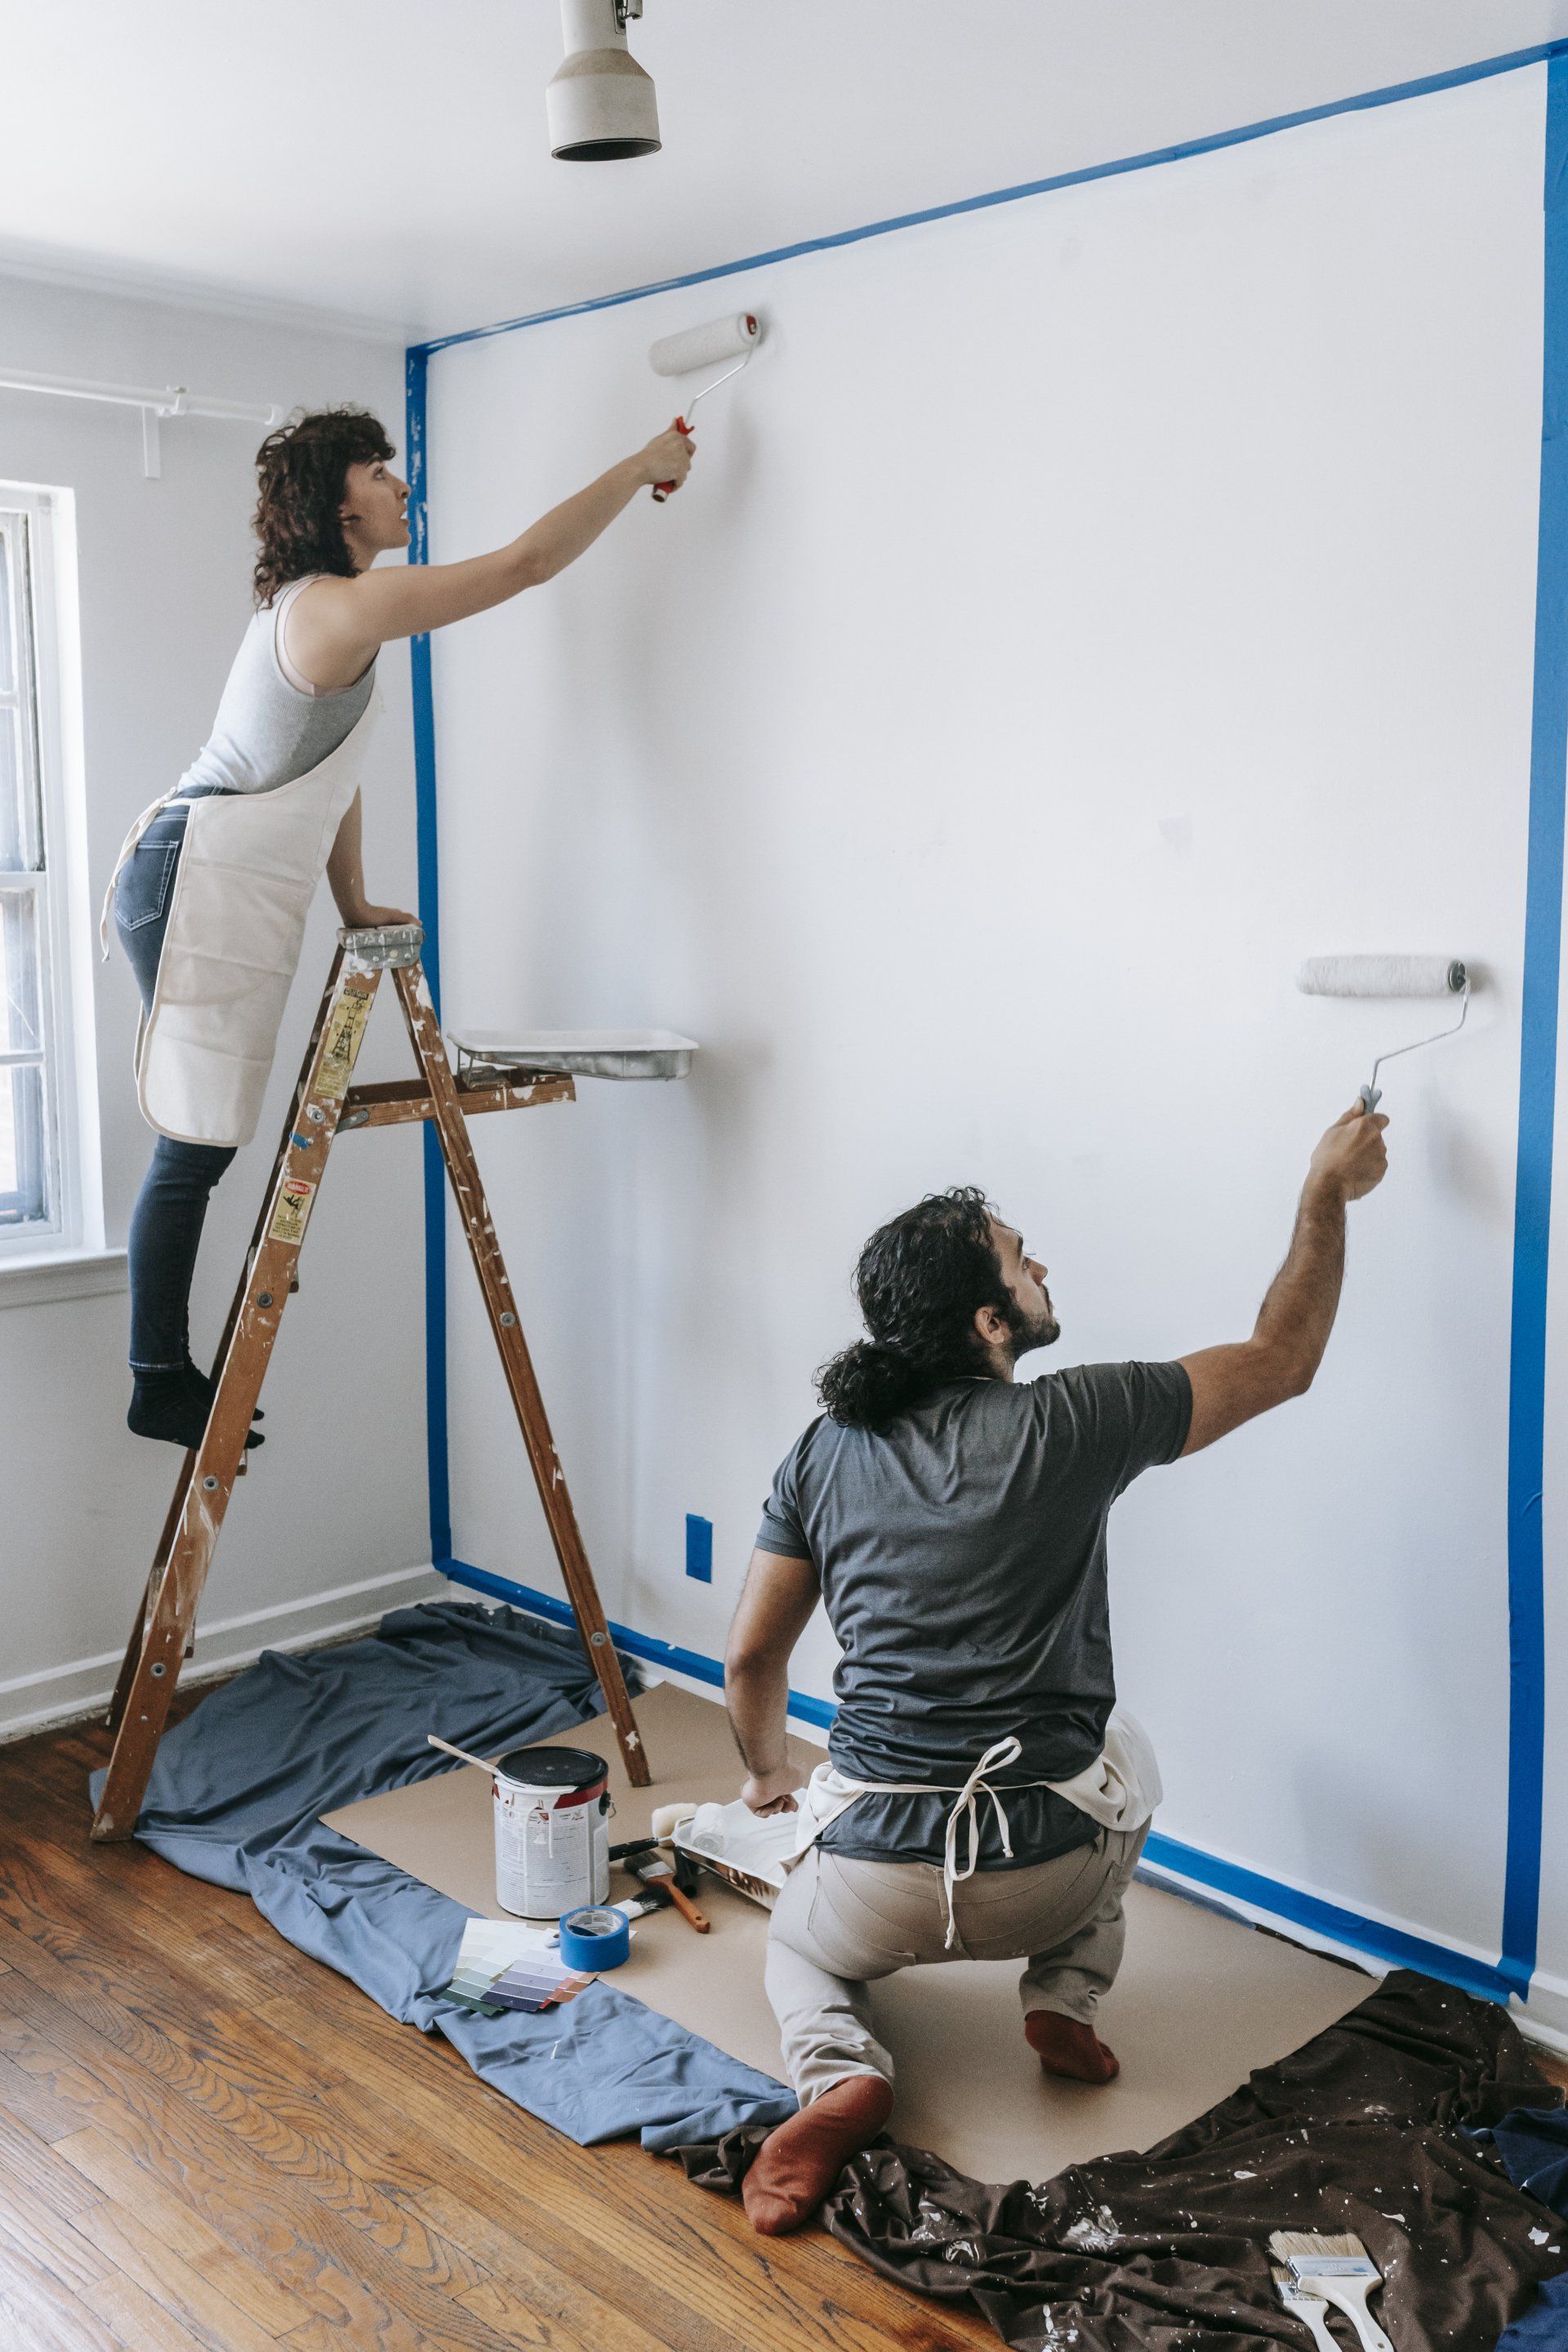 The picture is of two people painting on a ladder inside their home.